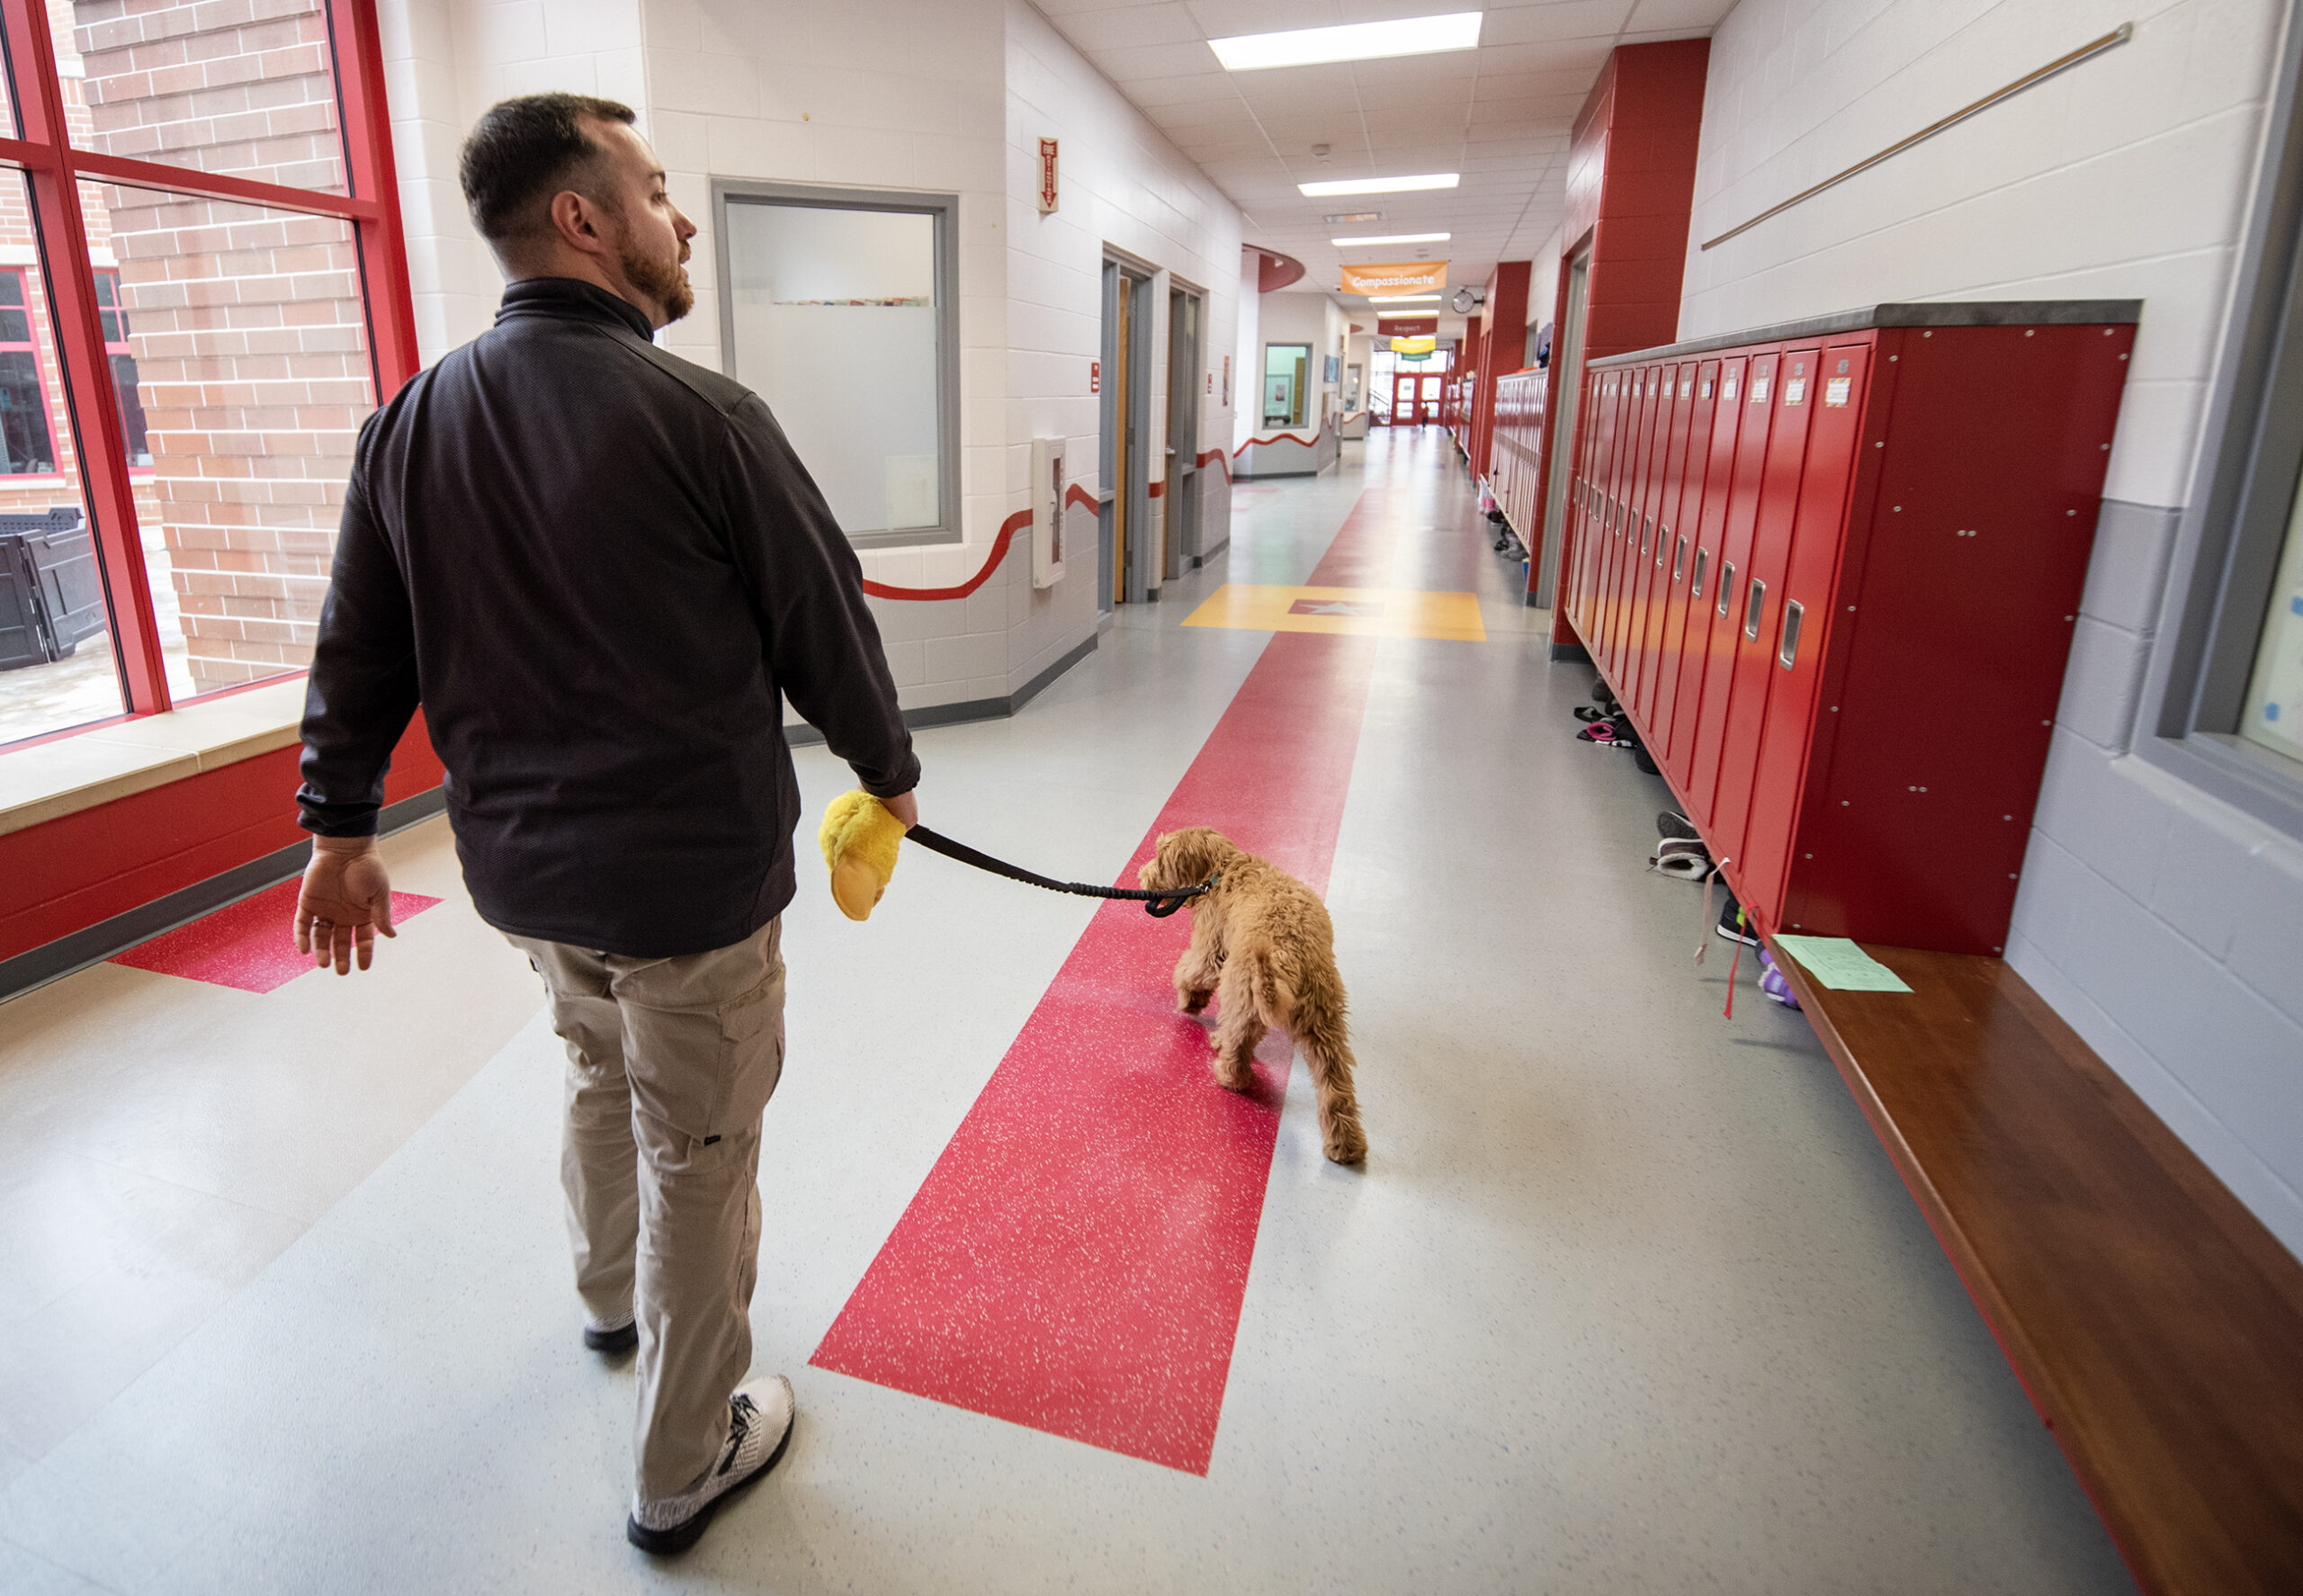 An officer walks a brown dog down a school hallway with red lockers.